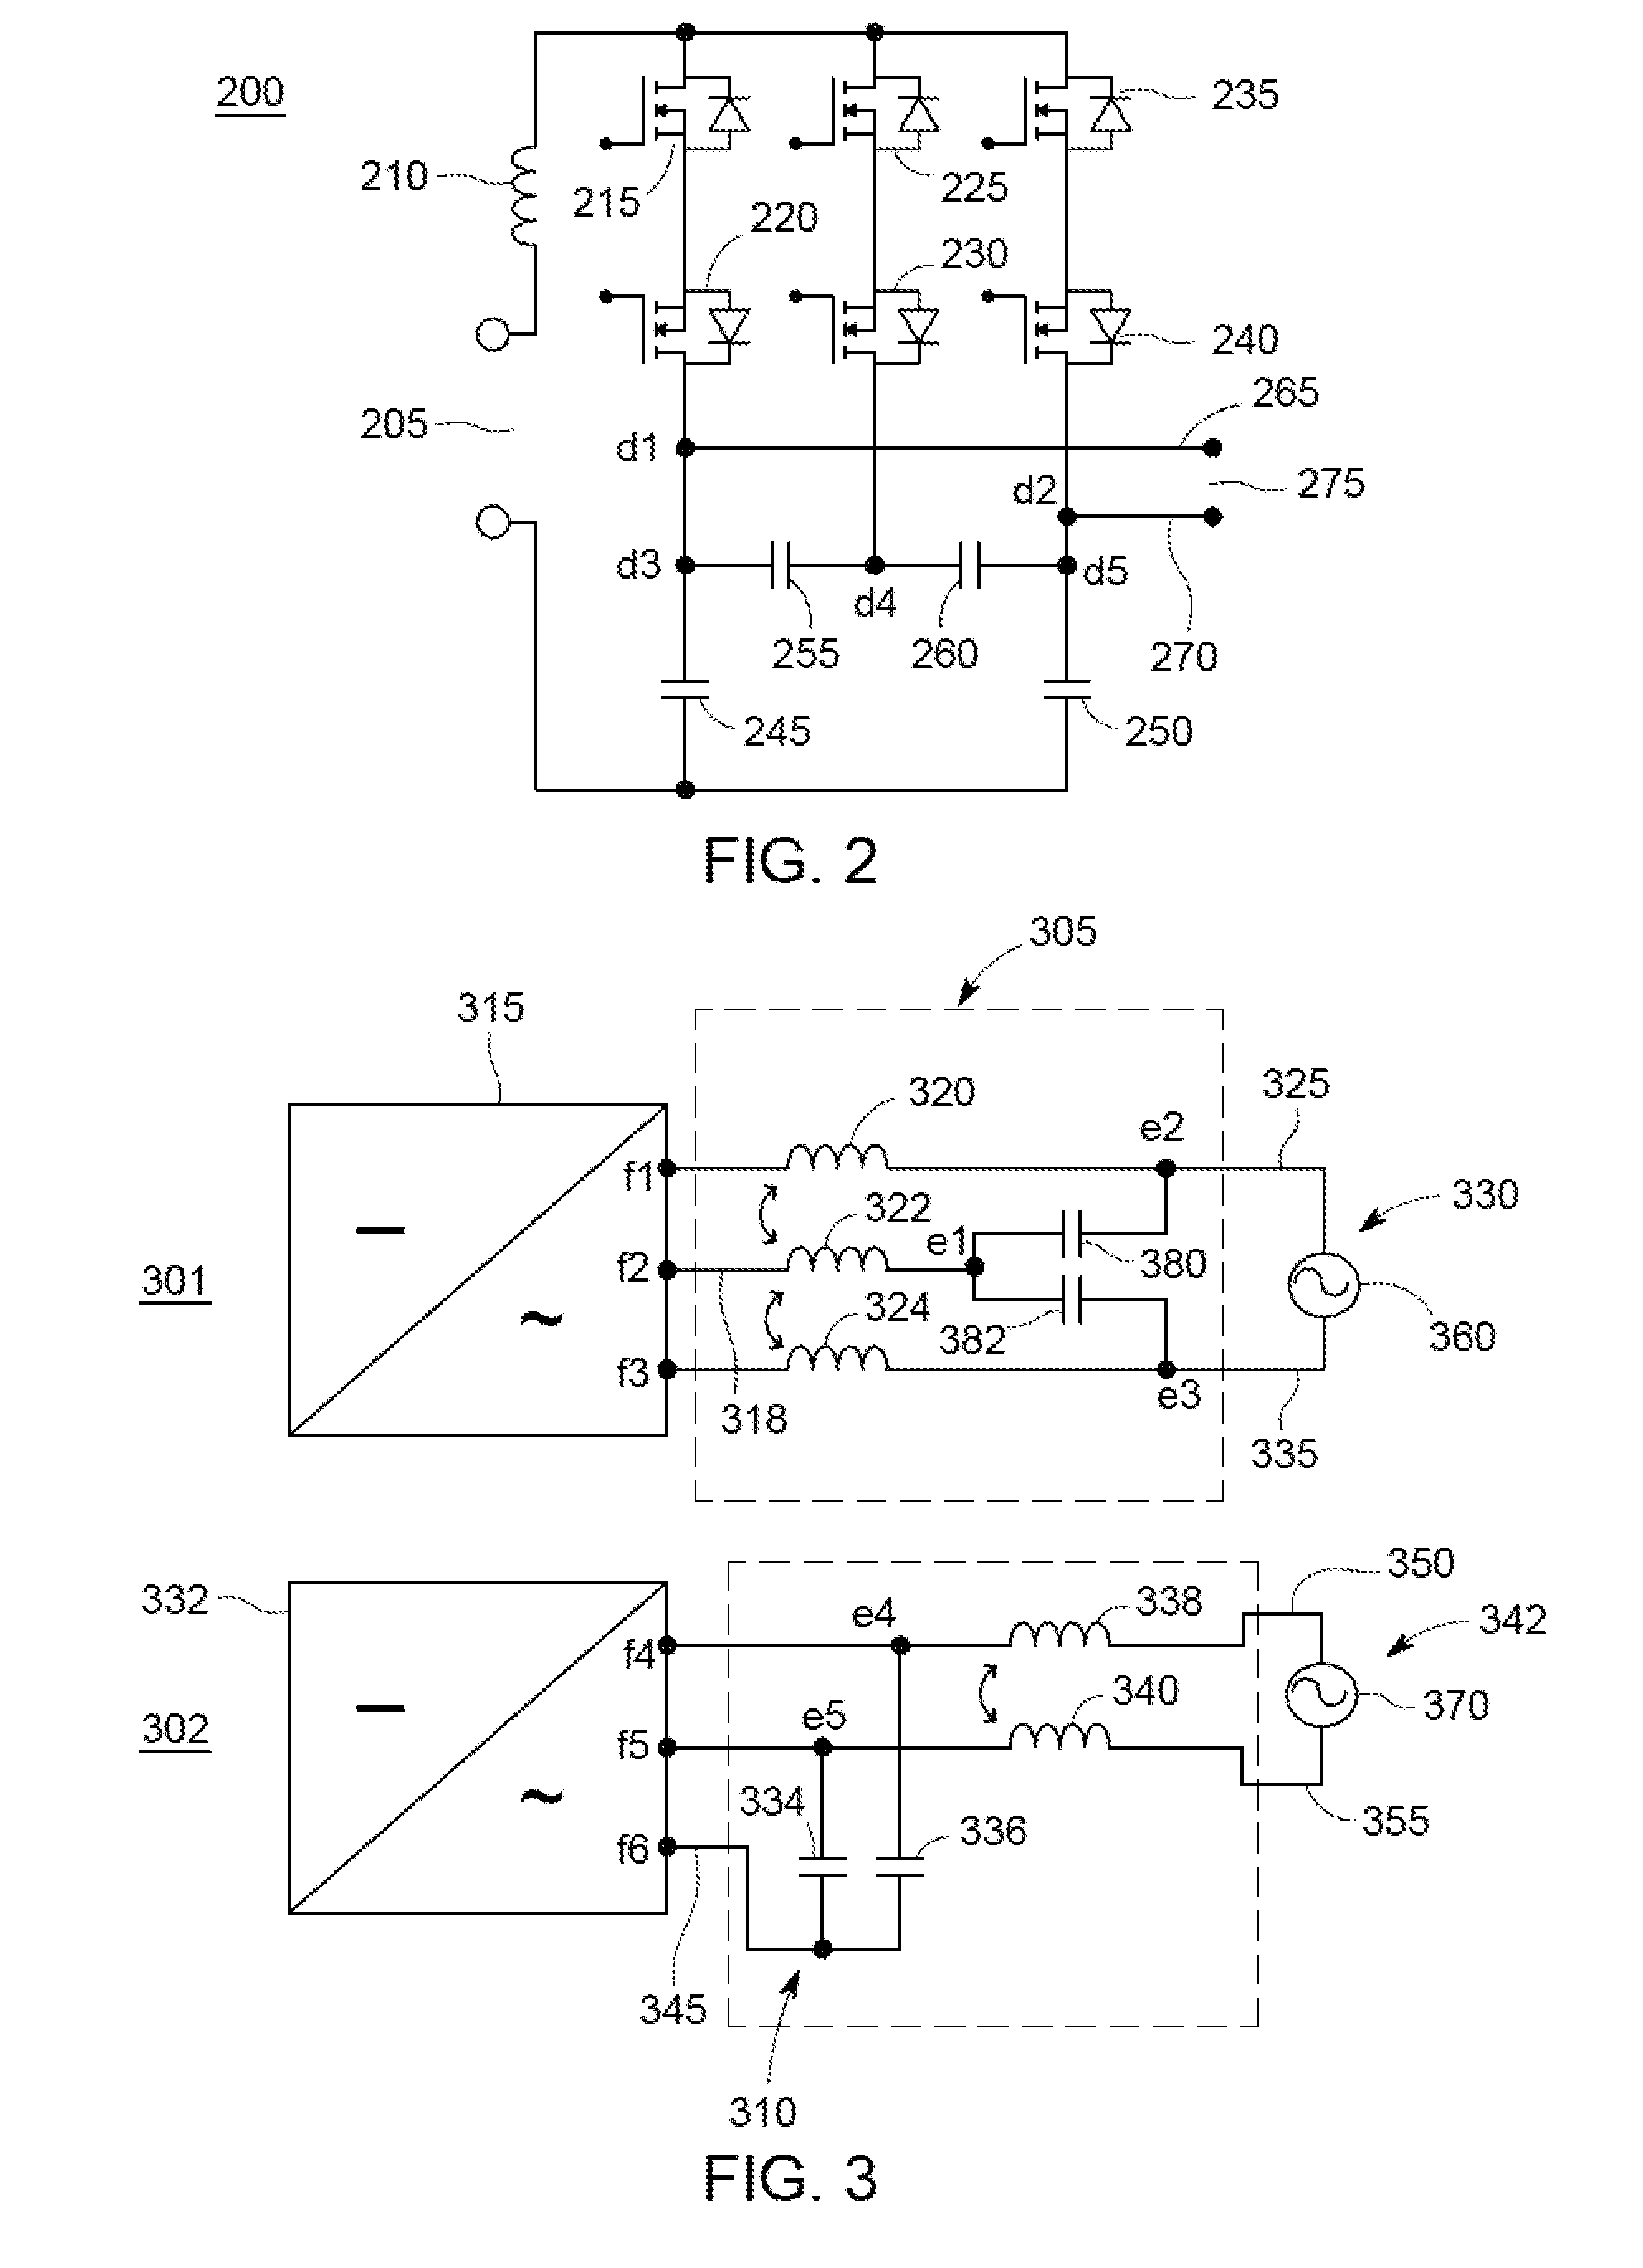 Single-phase cycloconverter with integrated line-cycle energy storage